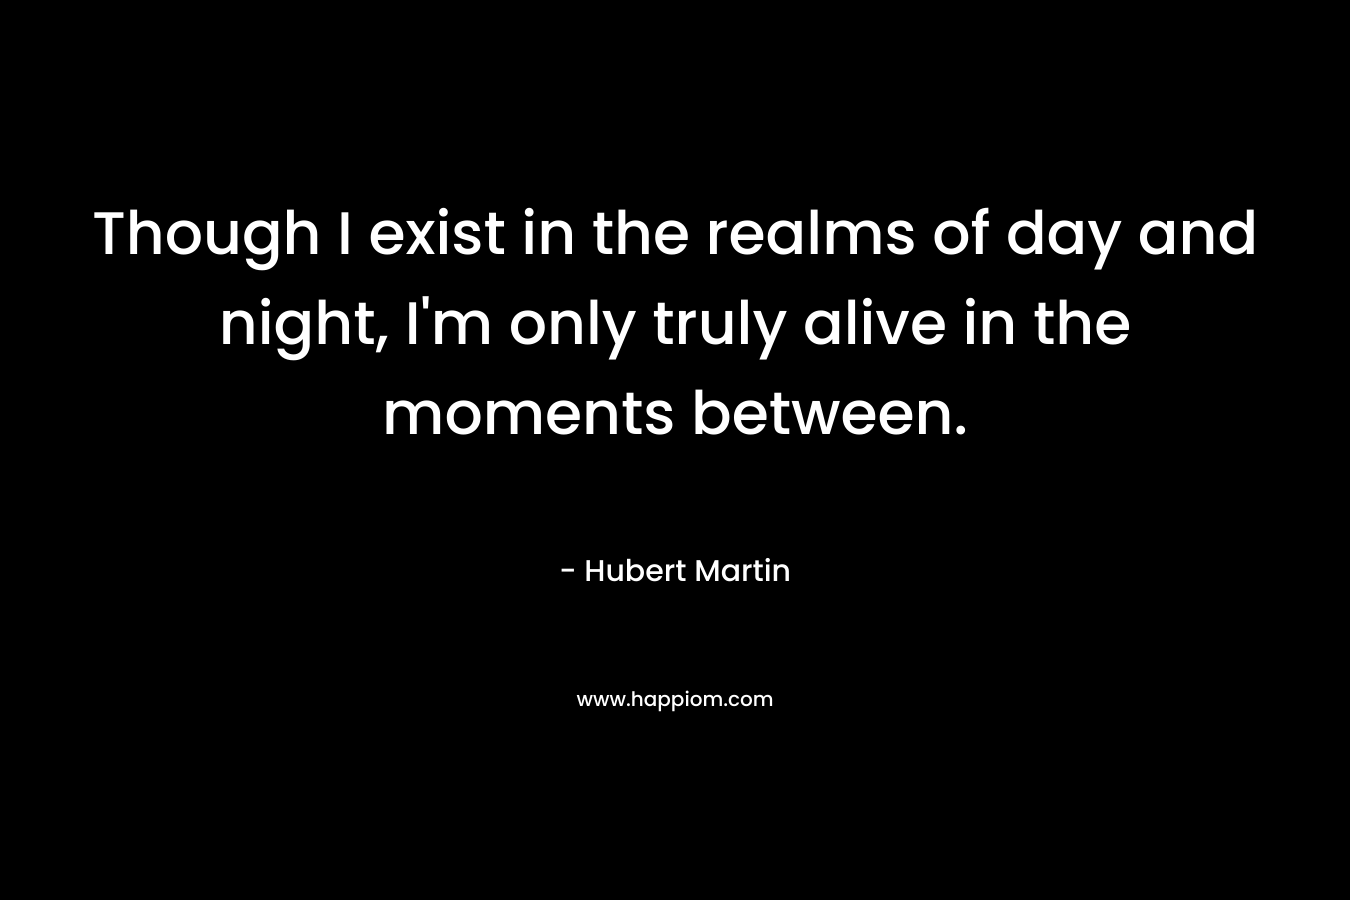 Though I exist in the realms of day and night, I'm only truly alive in the moments between.